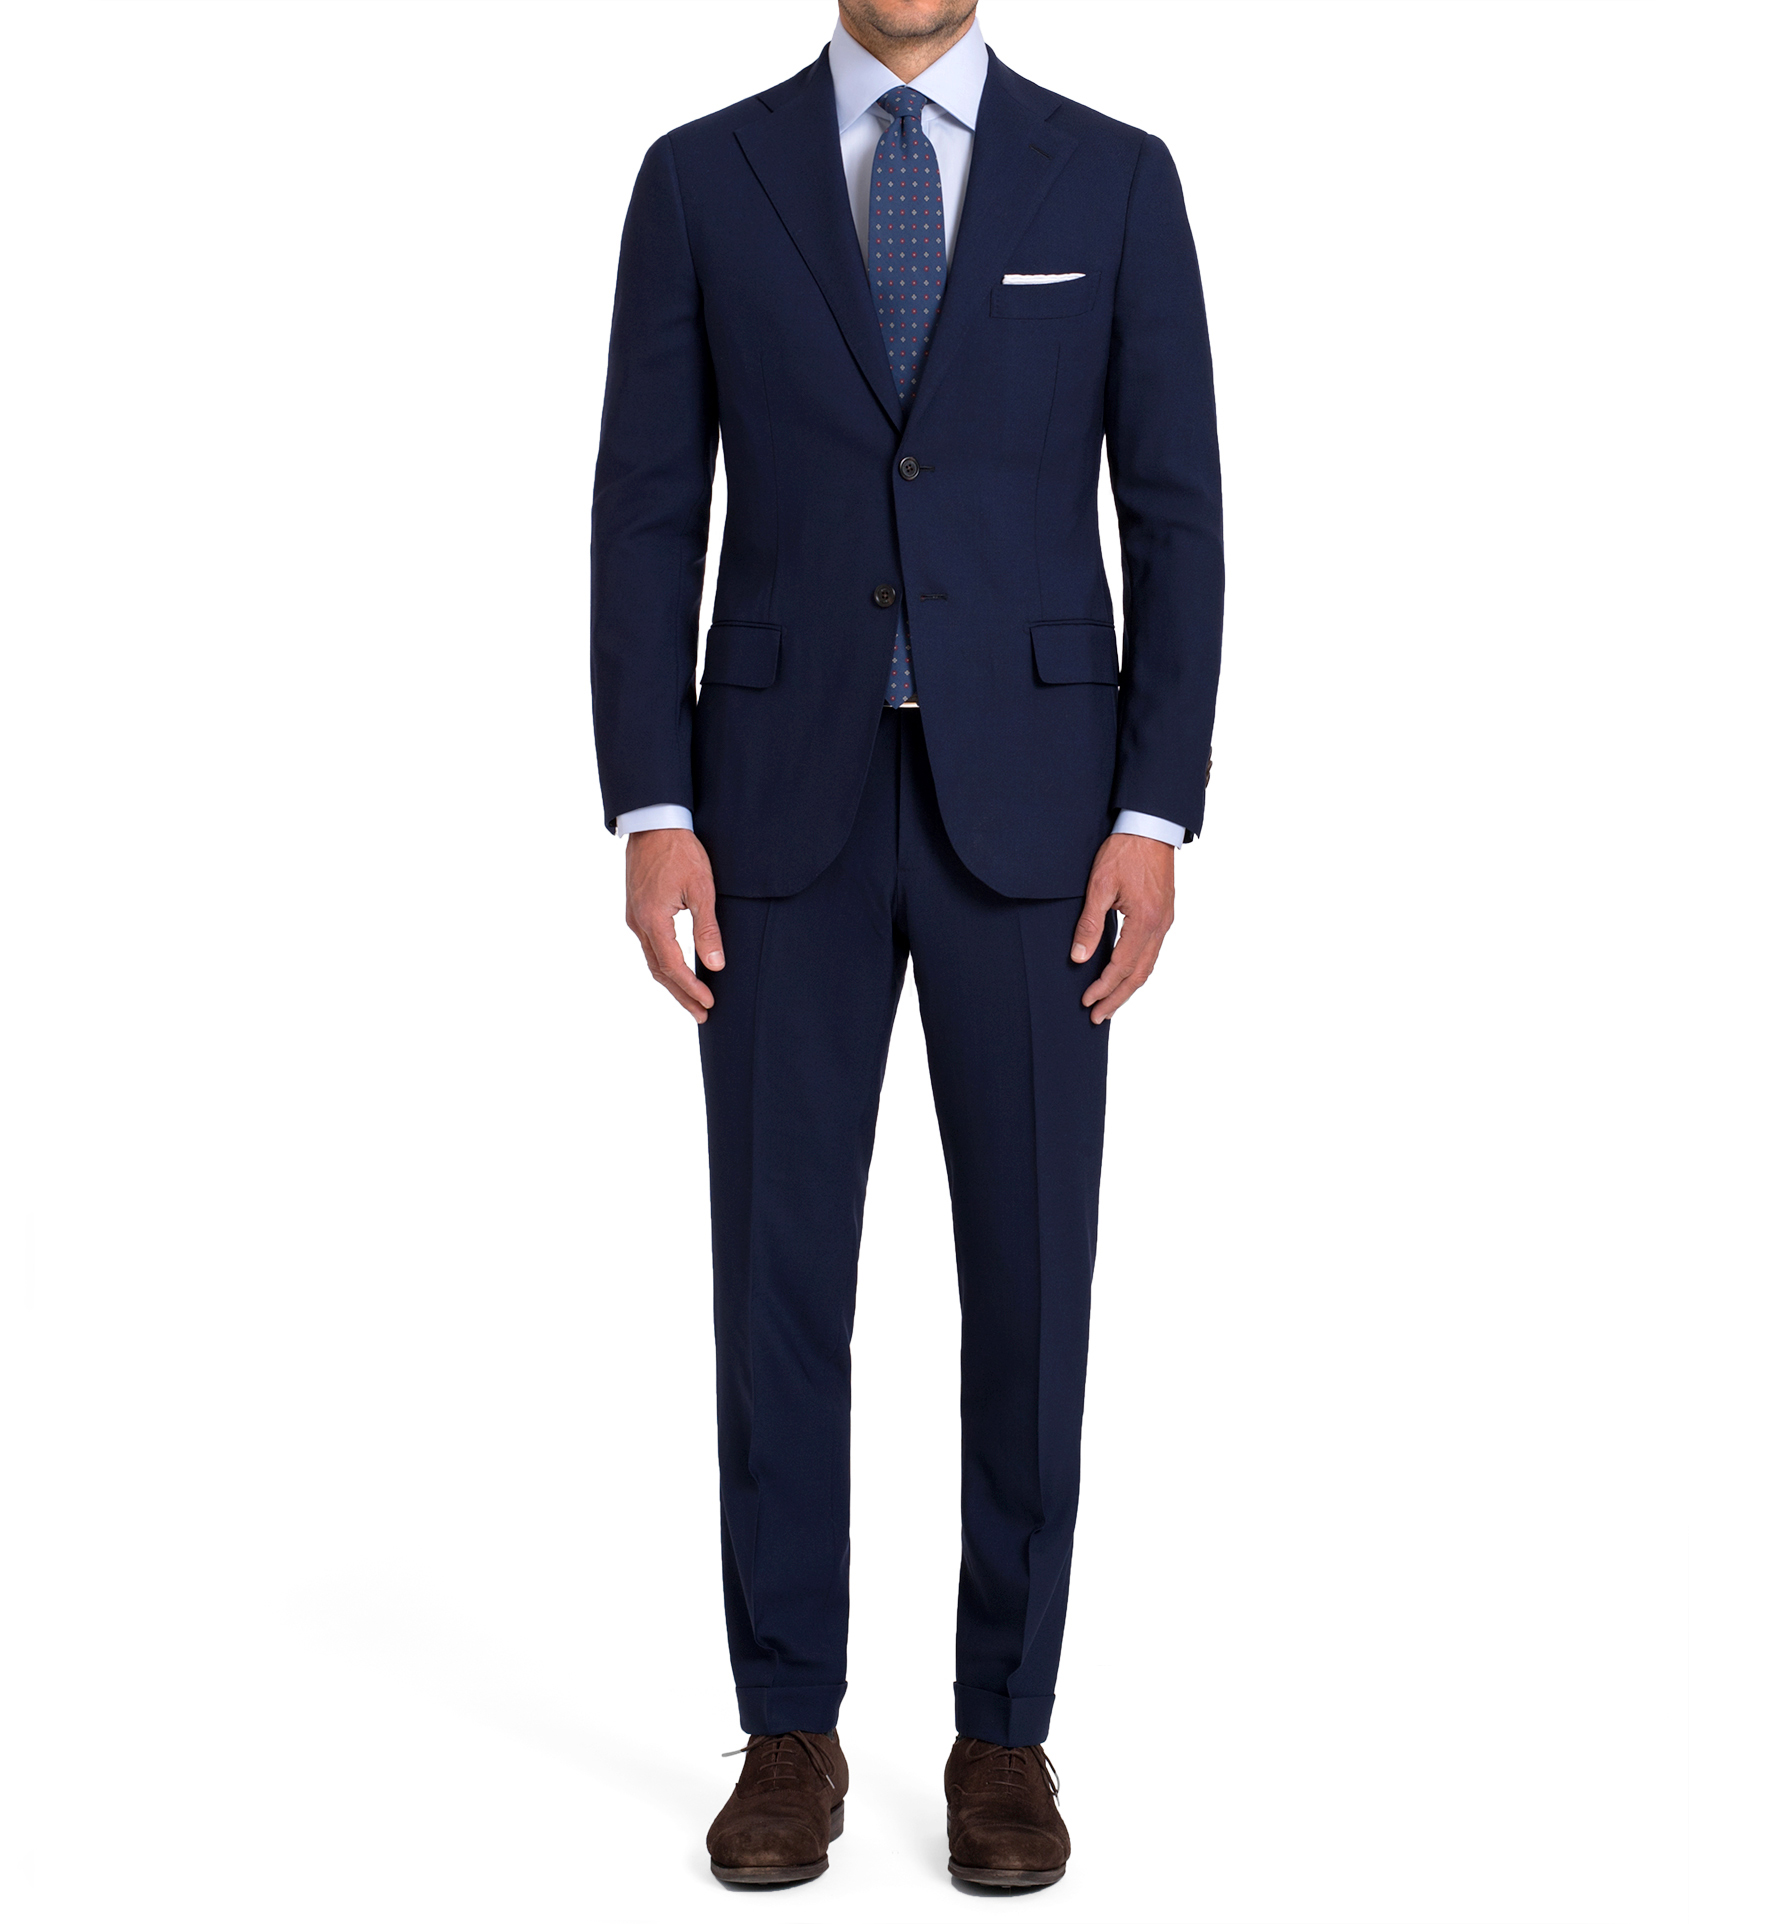 Allen Navy Fresco Suit with Cuffed Trouser - Custom Fit Tailored Clothing